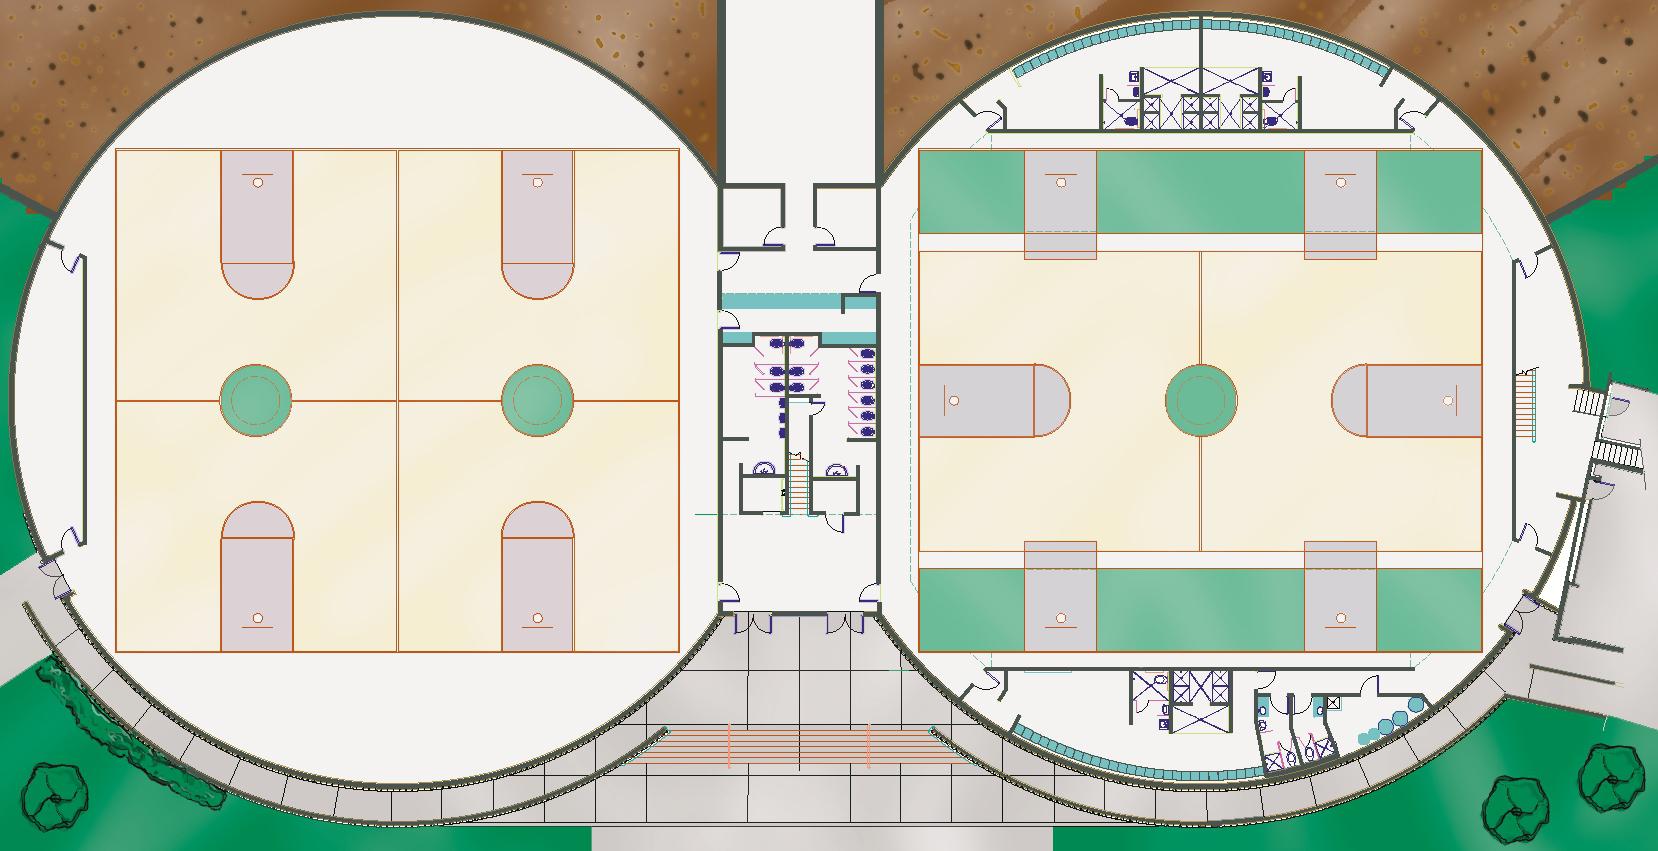 Interior floor plan for the Sports Event Center.